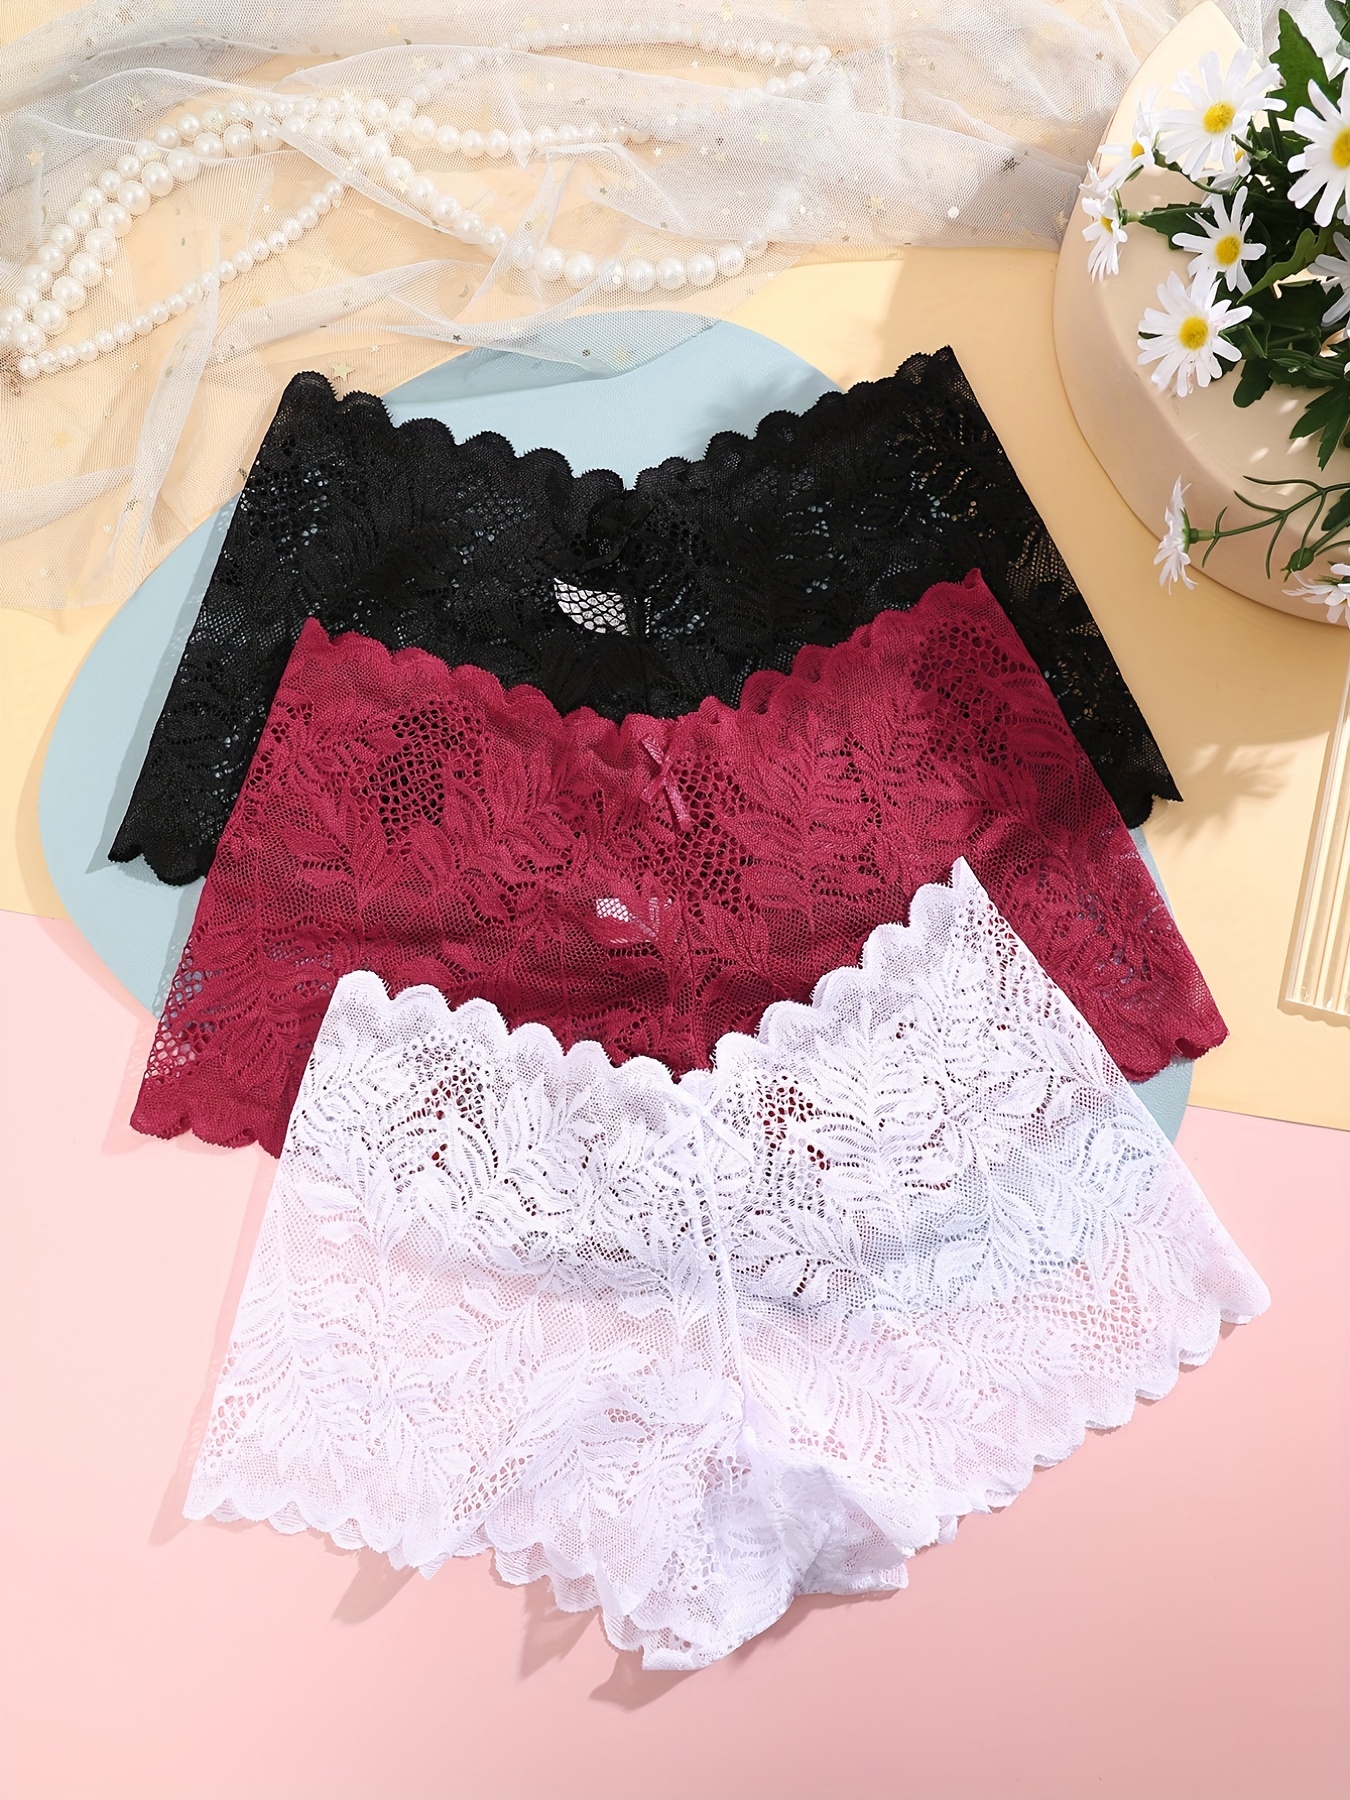 Women's Shaper Shorts With Hip Pad For Under Dresses Seamless Anti Chafing  Underwear Boyshorts Panties Under Skirts Safety Shorts